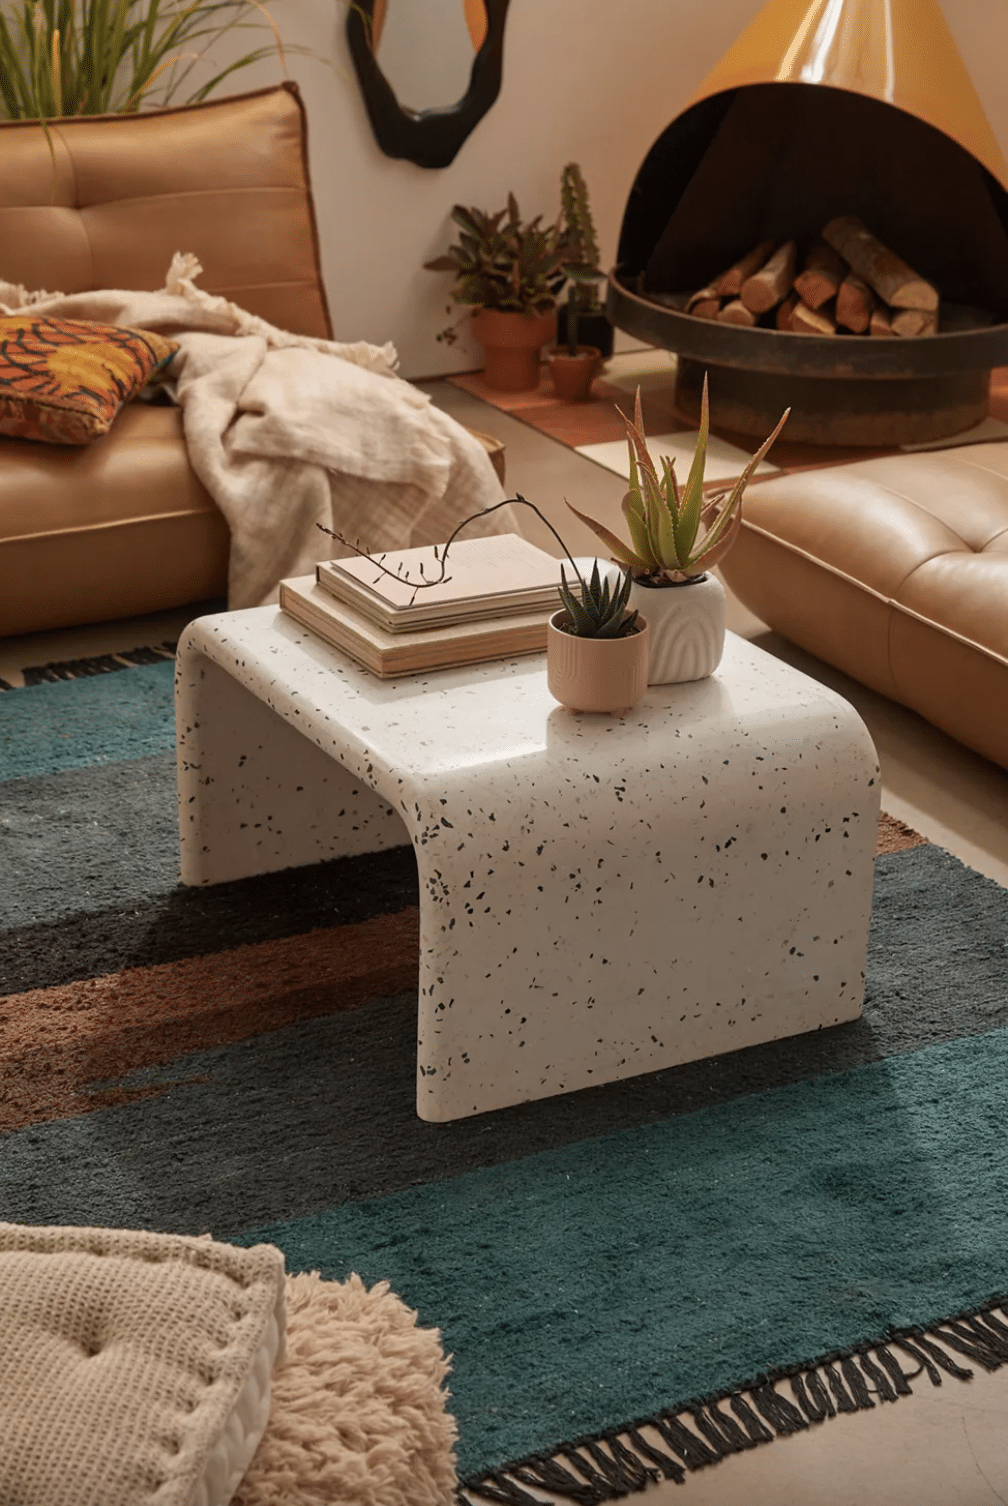 Terrazzo Coffee Tables, by Blogger What The Fab